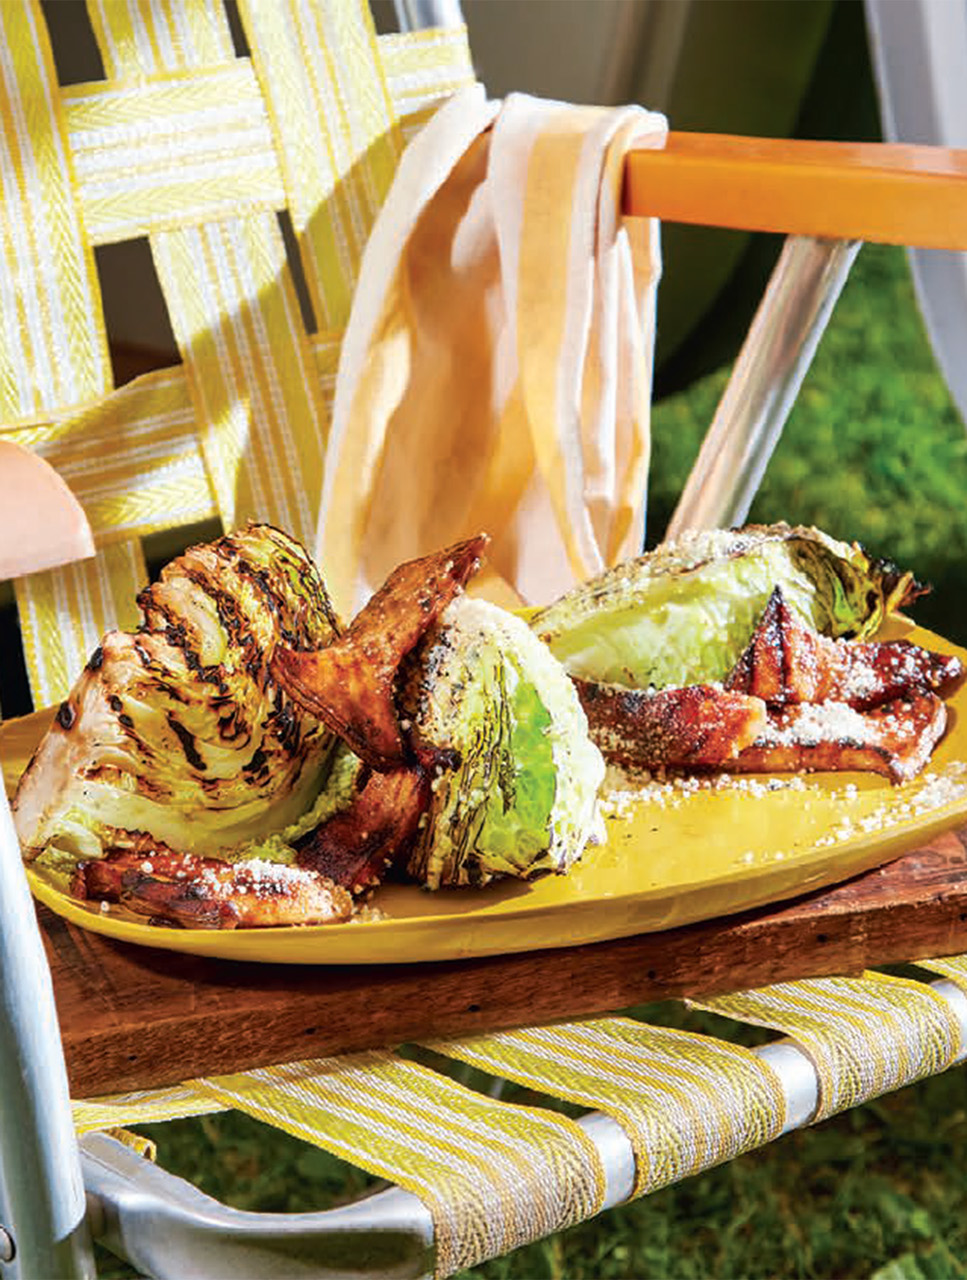 Grilled Cabbage Caesar with Mushroom “Bacon”